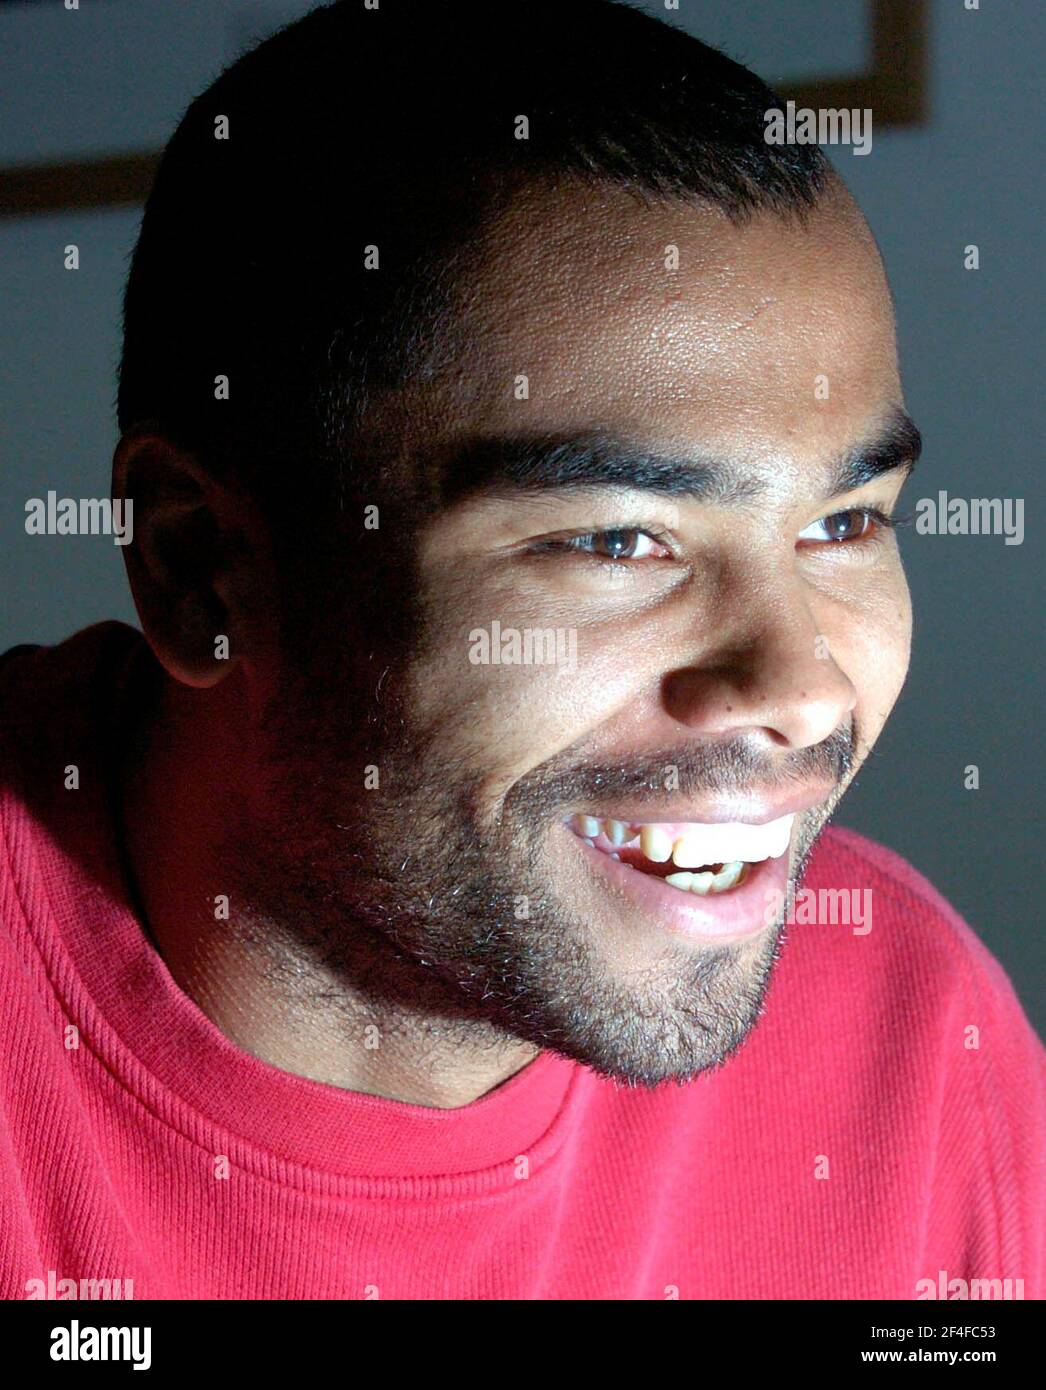 ASHLEY COLE AT ARSENAL'S TRAINING GROUNG AT LONDON COLNEY 30/1/2004 PICTURE DAVID ASHDOWNFOOTBALL Stock Photo